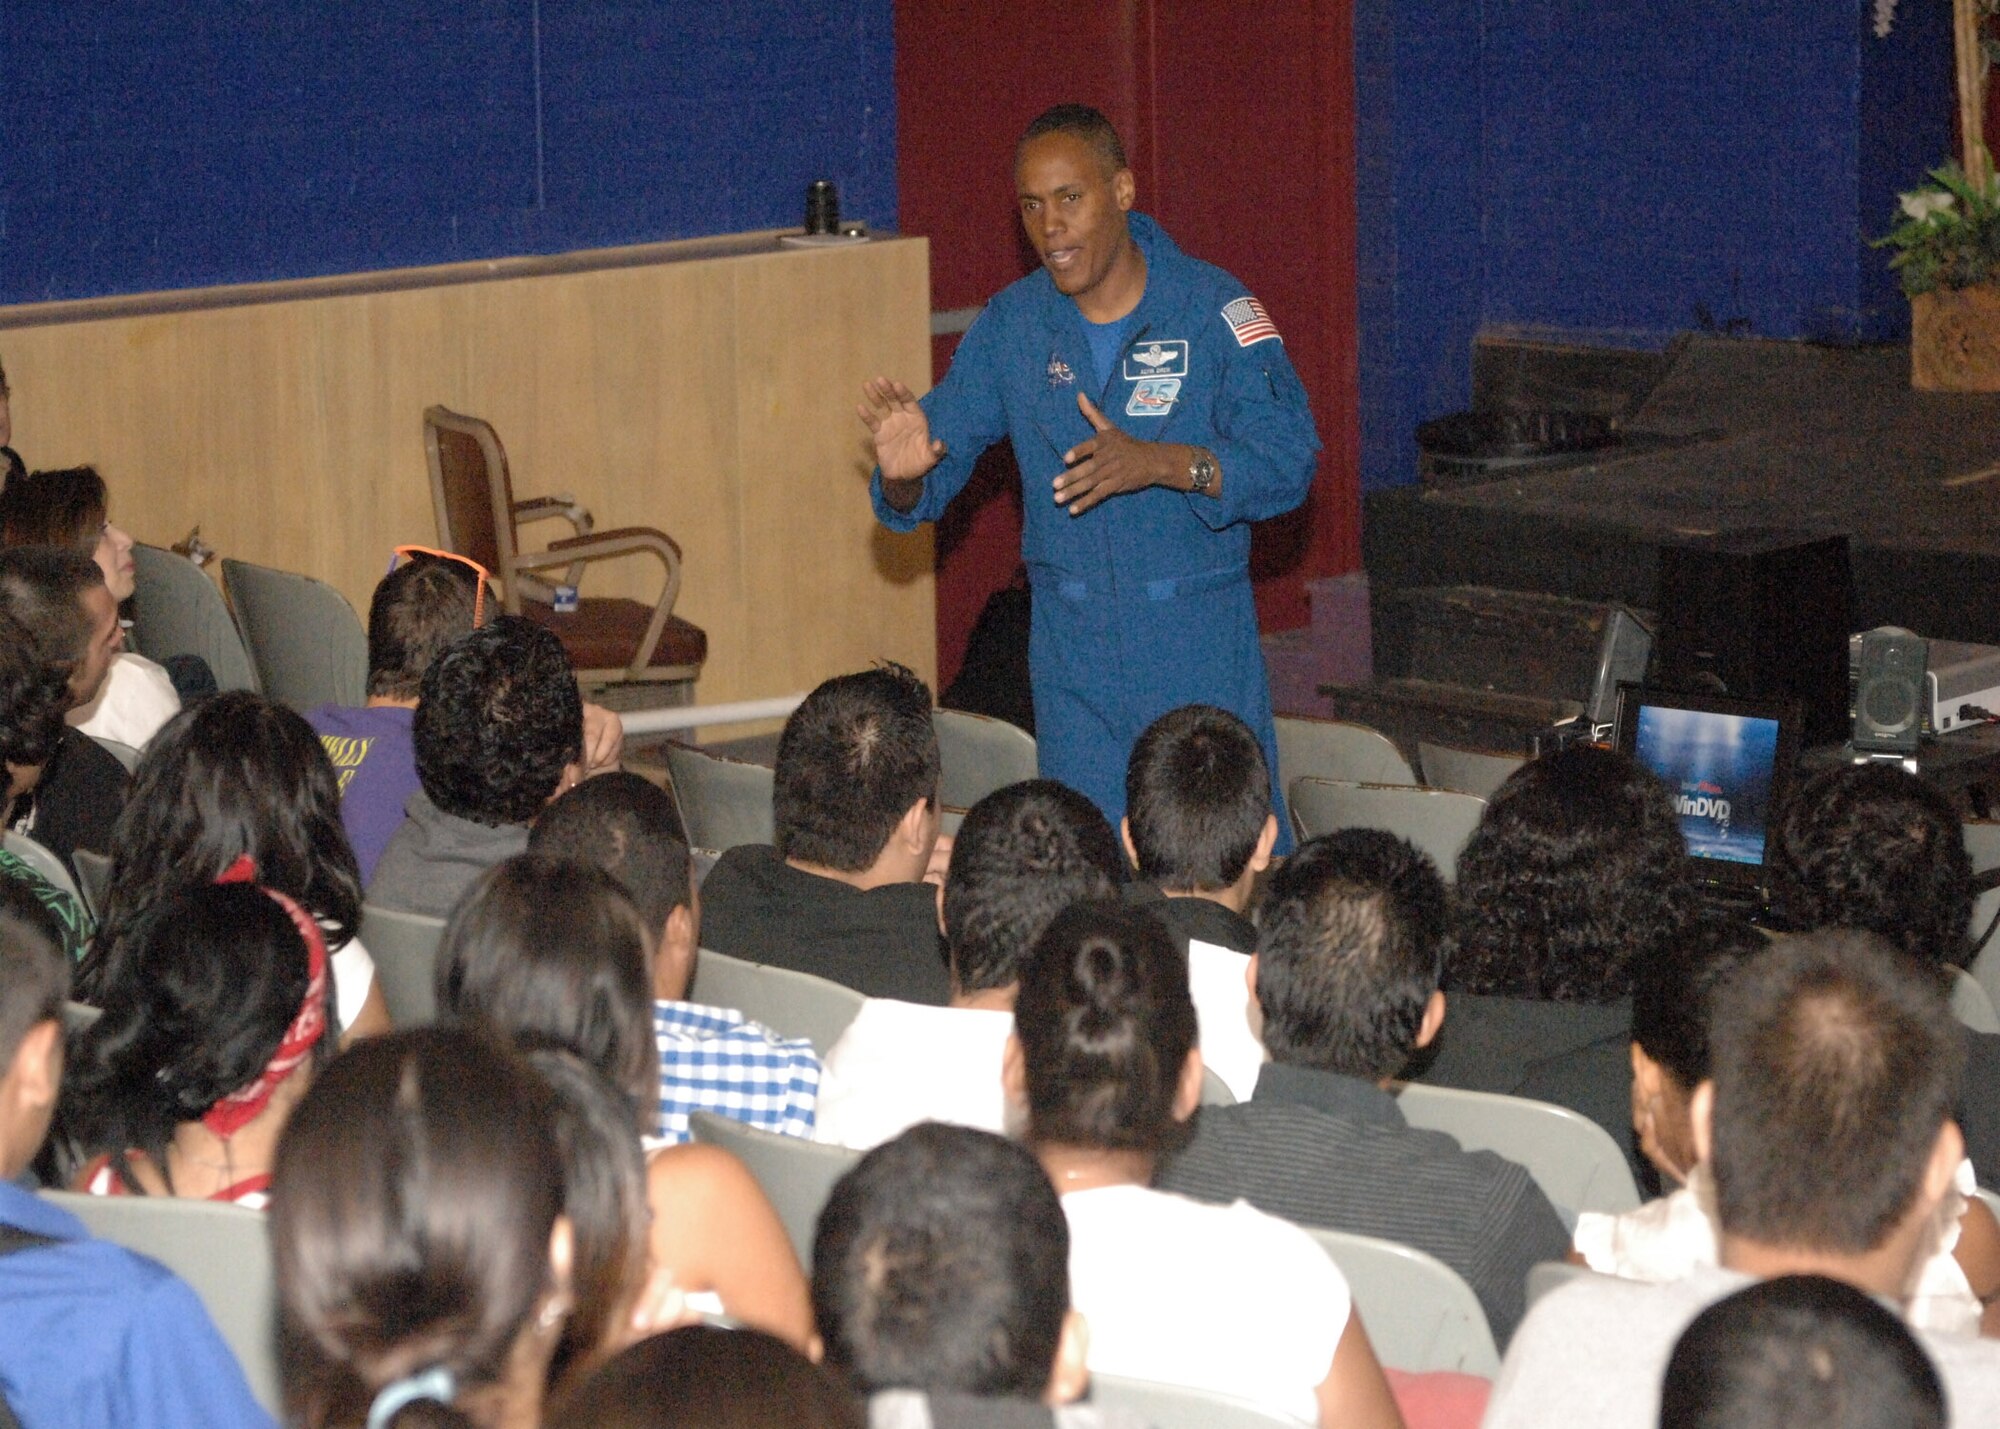 Air Force Astronaut Col.  B. Alvin Drew addresses students at Hawthorne High School in Hawthorne, Calif., Nov. 18.  Currently stationed at the Johnson Space Center in Houston, Texas, the colonel shares his knowledge and experience of space operations with the public during Air Force Week in Southern California, Nov. 14-21.  Air Force Week serves as the premier platform to share the Air Force story with our fellow citizens through community visits and talks by Air Force officials, flight demonstrations and displays providing an up close and personal look at the men and women of the Air Force serving worldwide in defense of freedom. (Photo by Atiba S. Copeland)